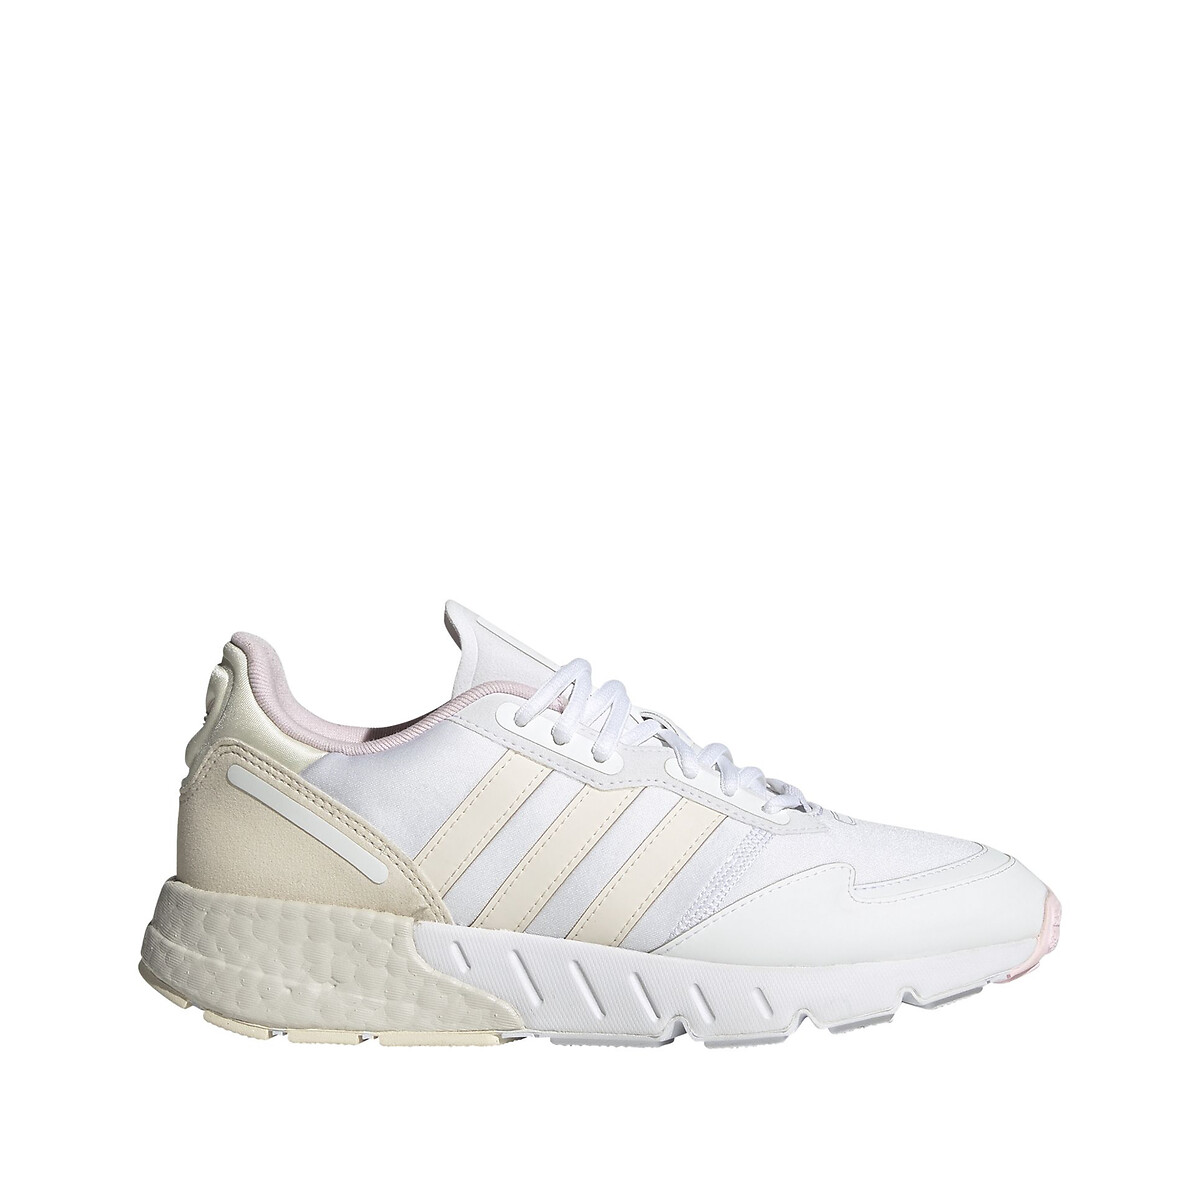 Nuclear Hostal Indirecto Adidas zx 1k boost | La Redoute